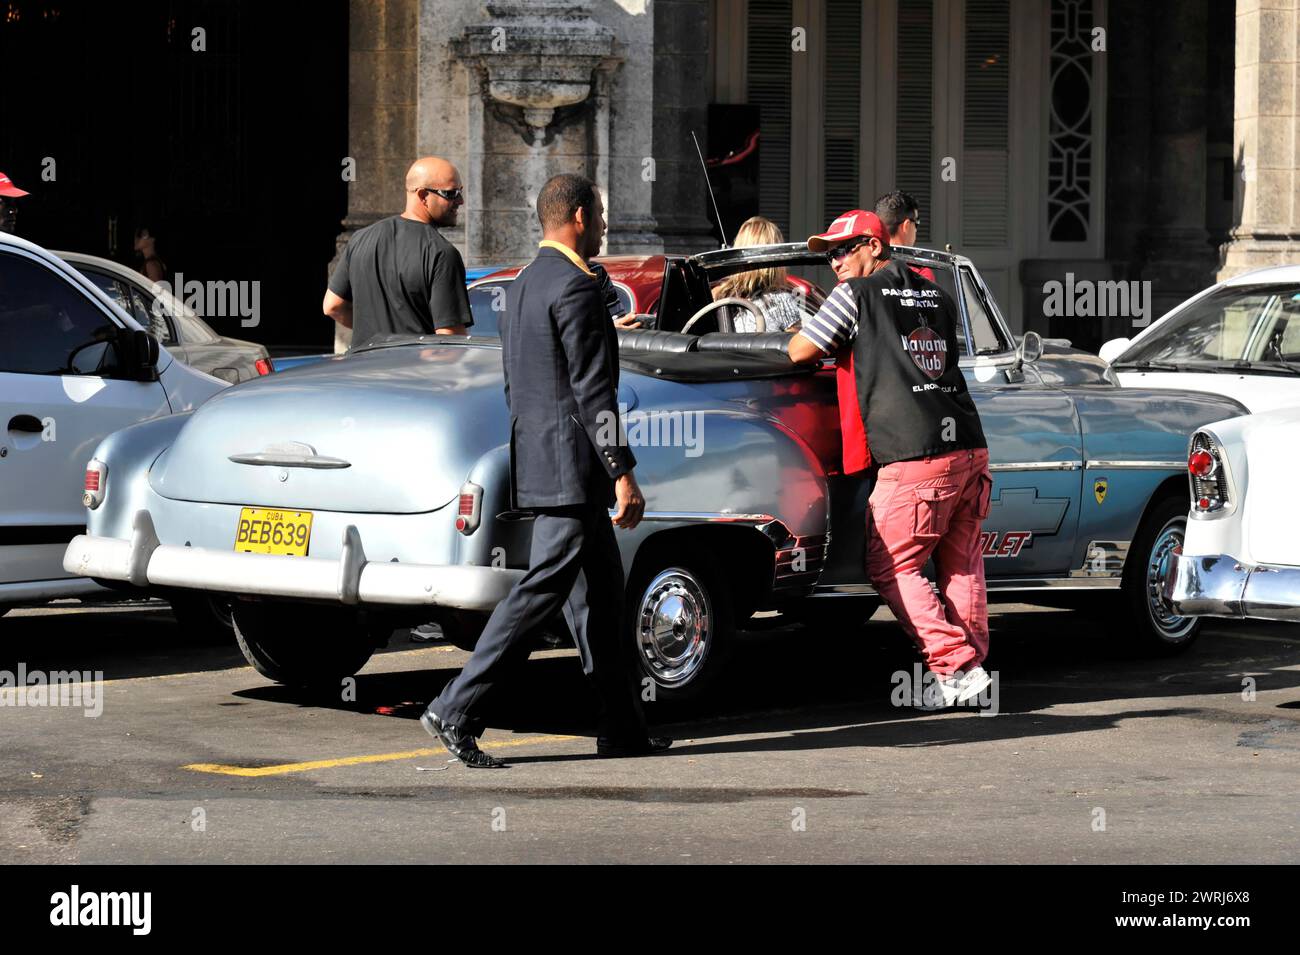 People helping elderly person into a taxi on a busy city street, Havana, Cuba, Central America Stock Photo